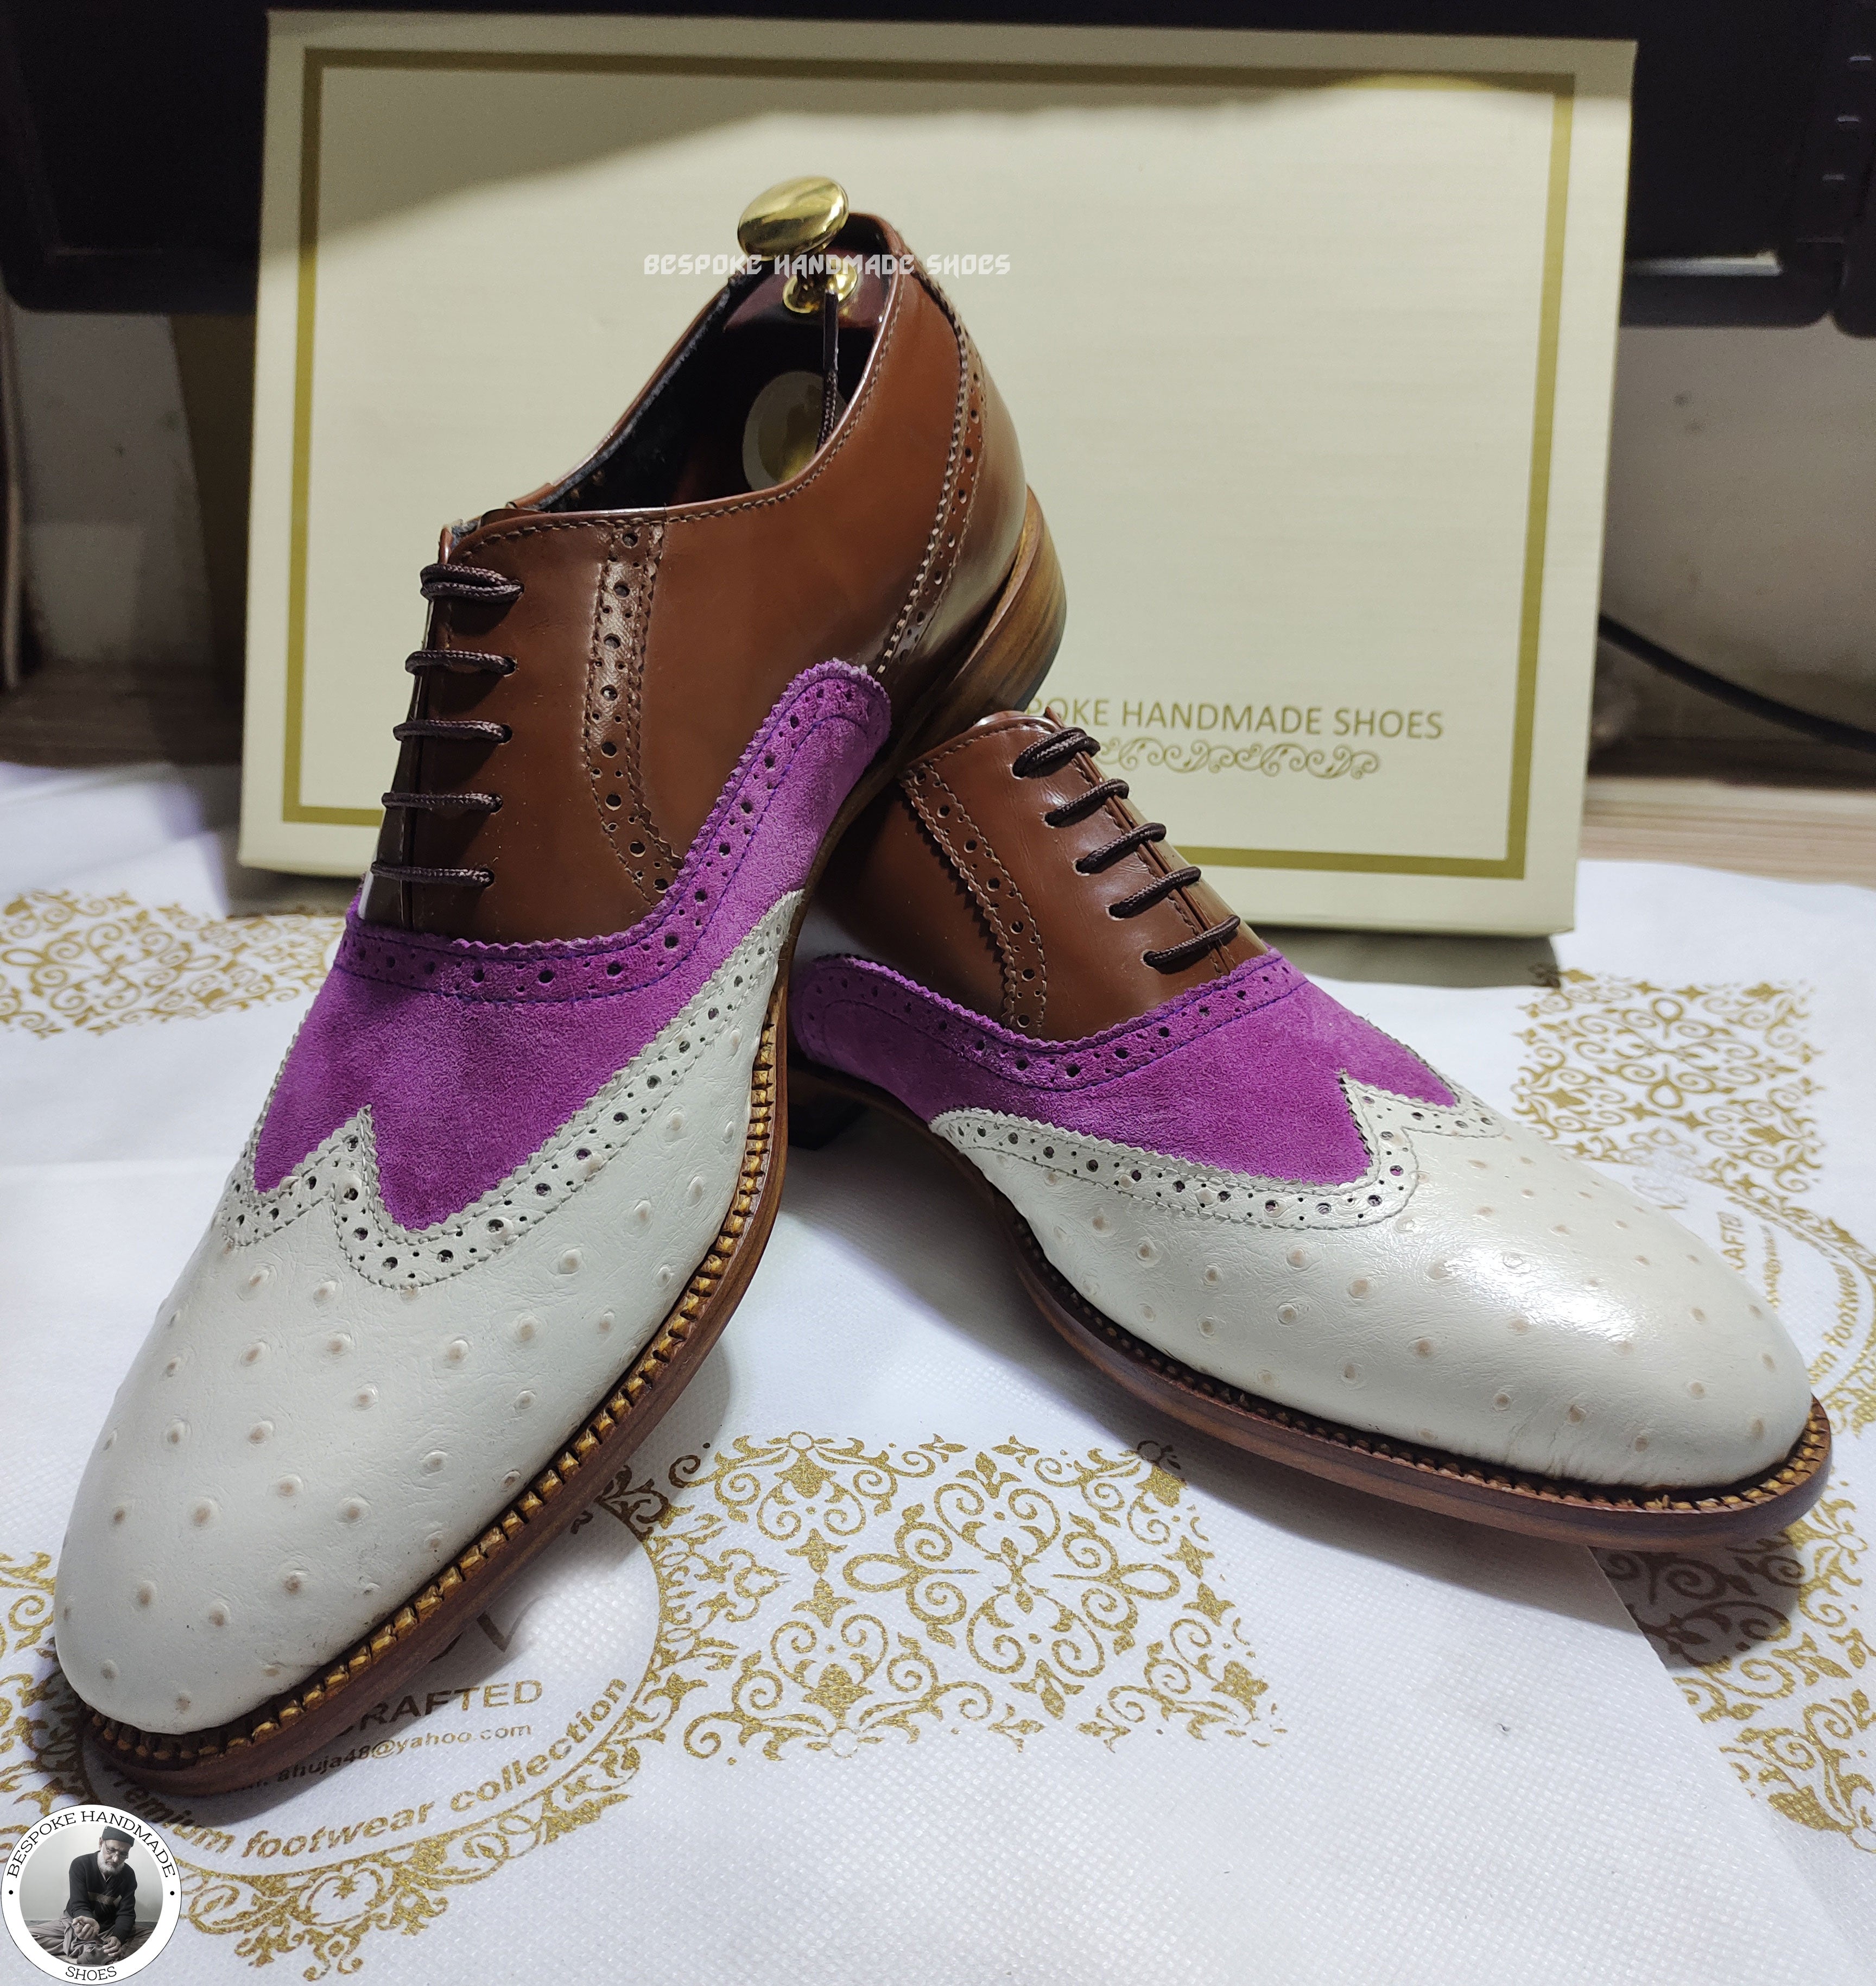 Handmade Men's Three Tone Leather and Suede Wingtip Ostrich Oxford Dress Shoes